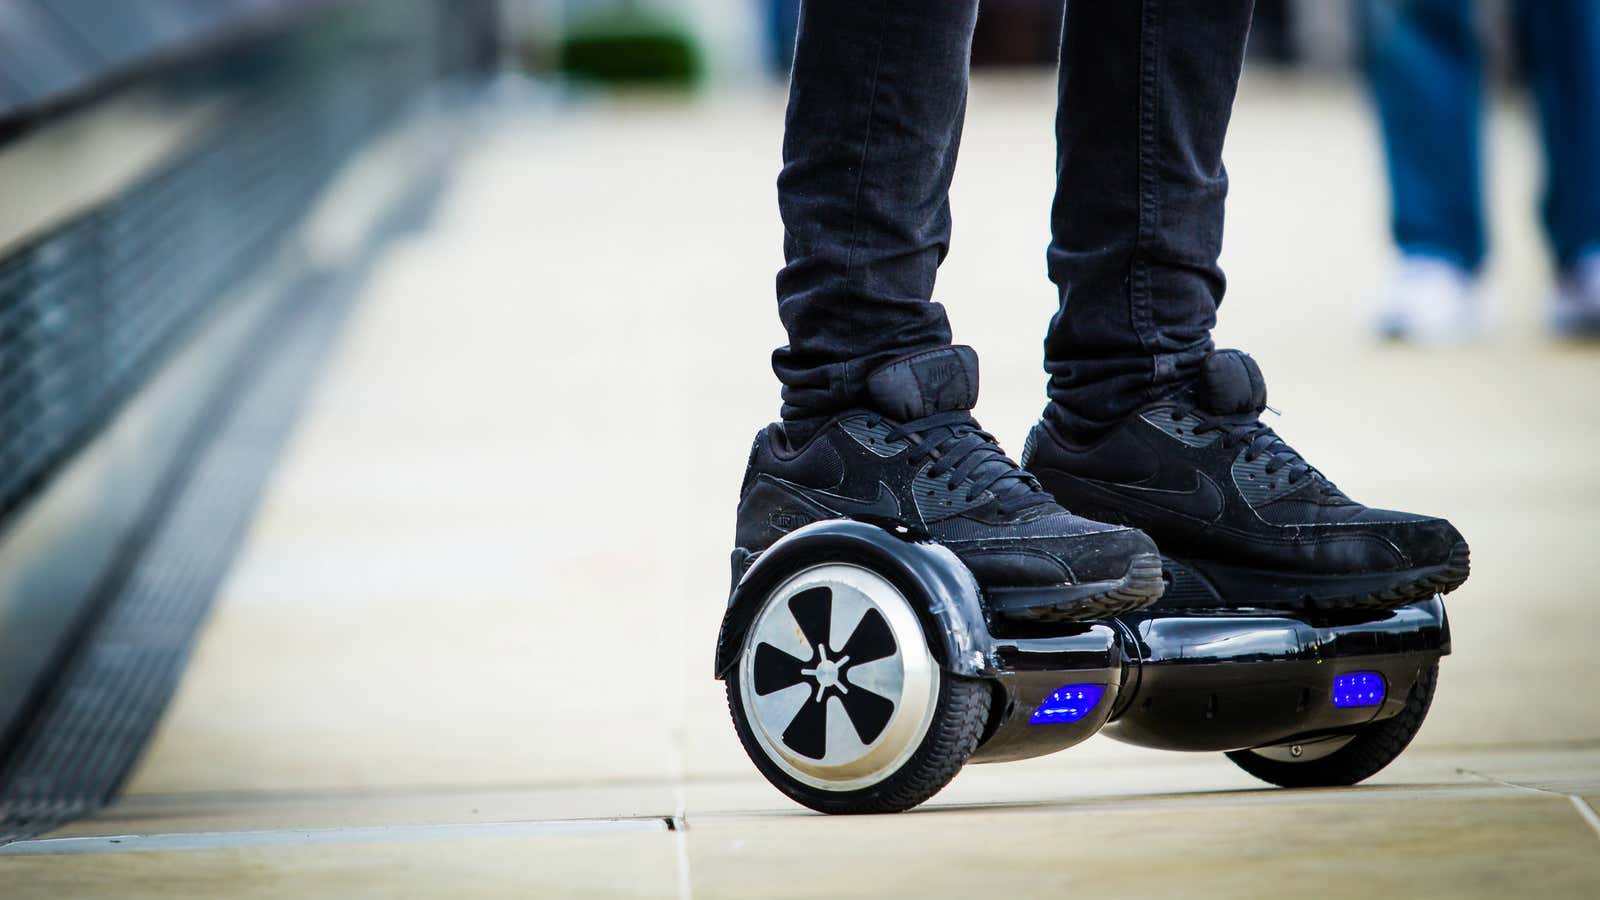 This hoverboard will self-destruct in 3…2…1…